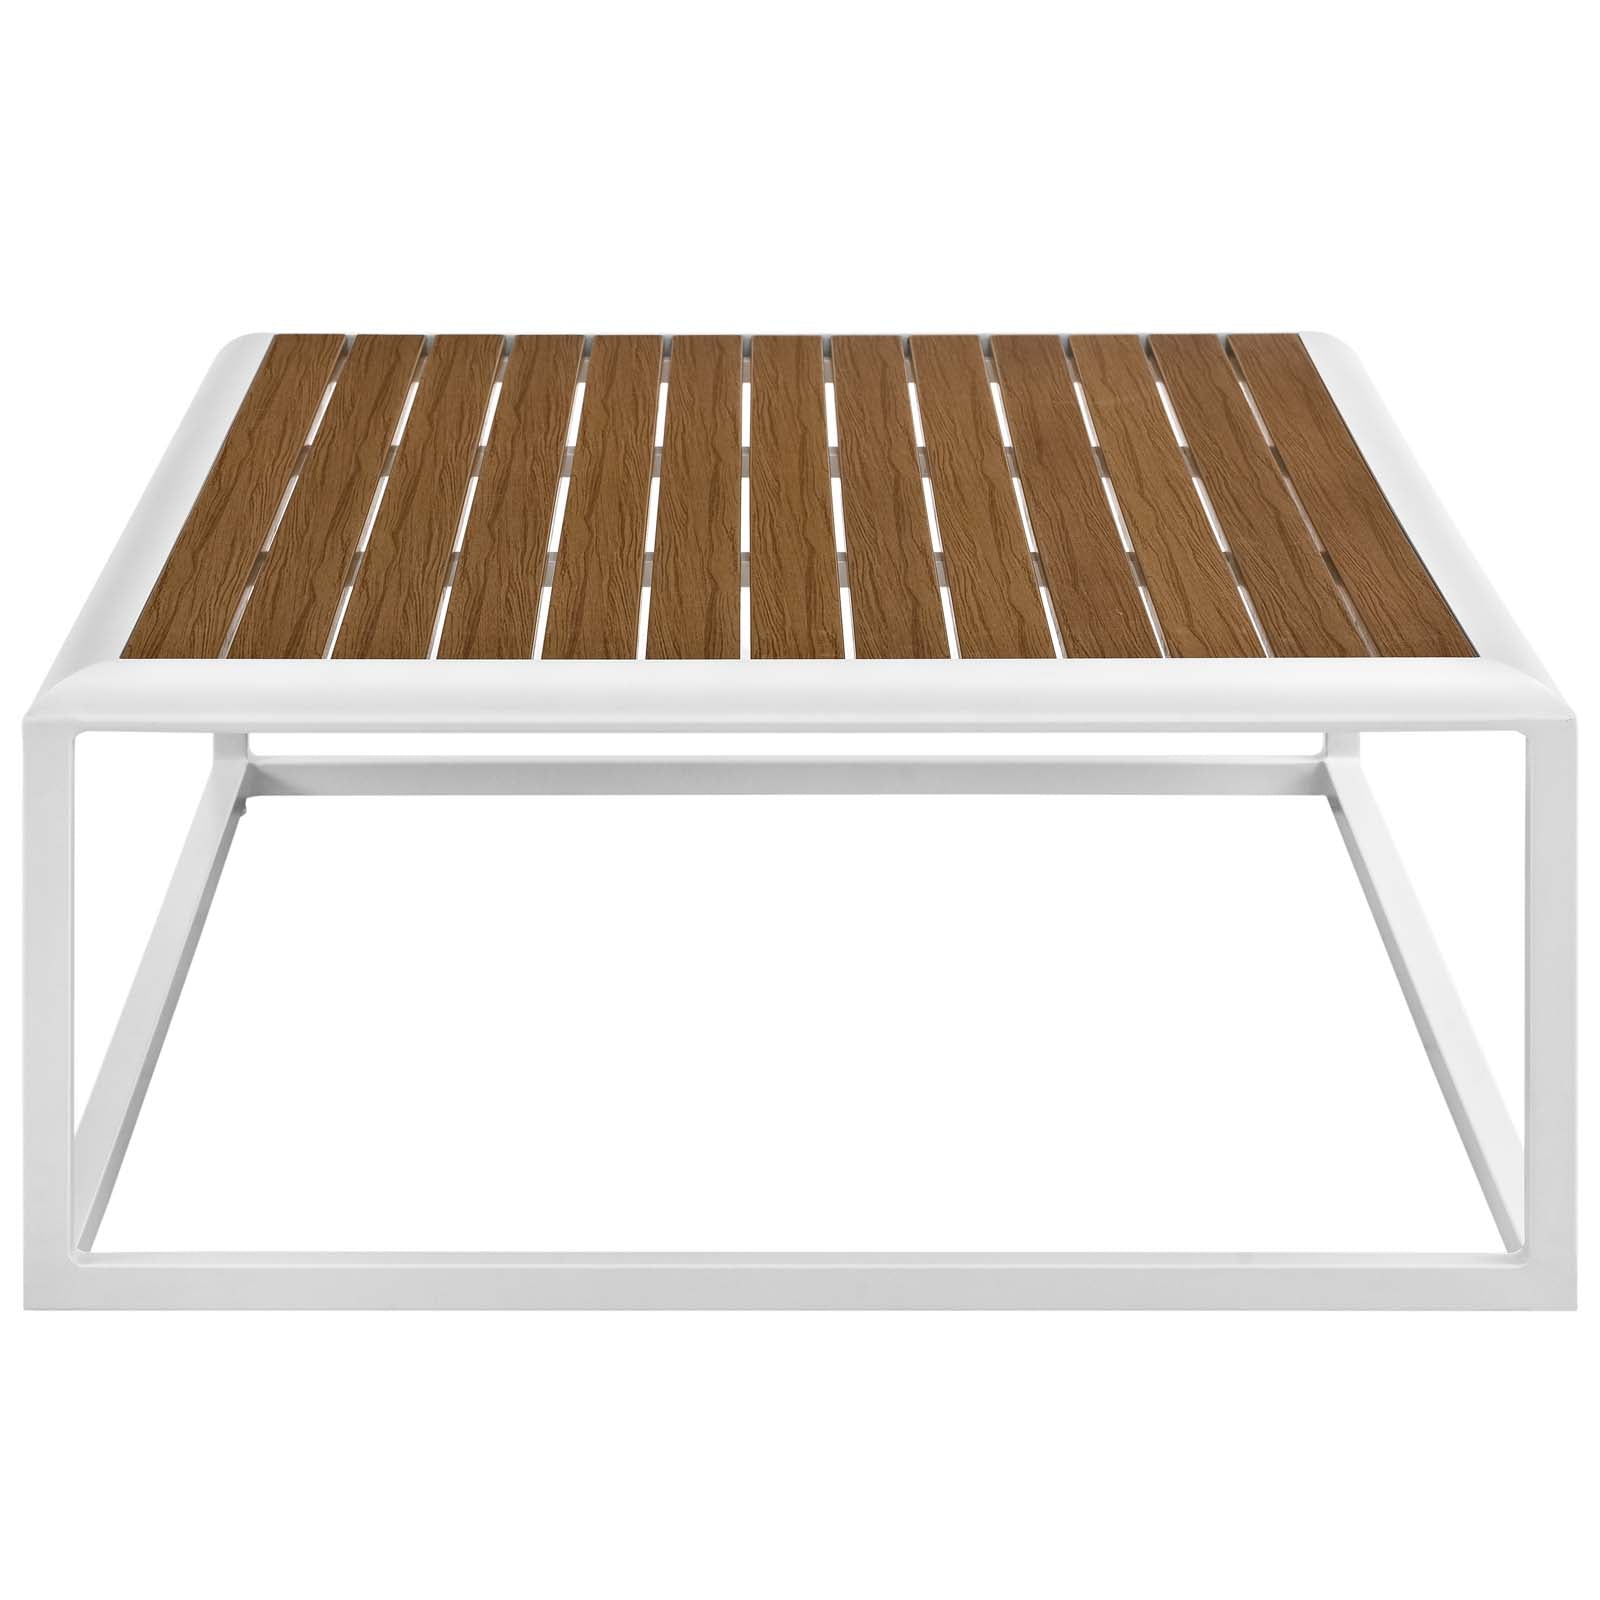 Stance Rectangular Coffee Table White & Natural